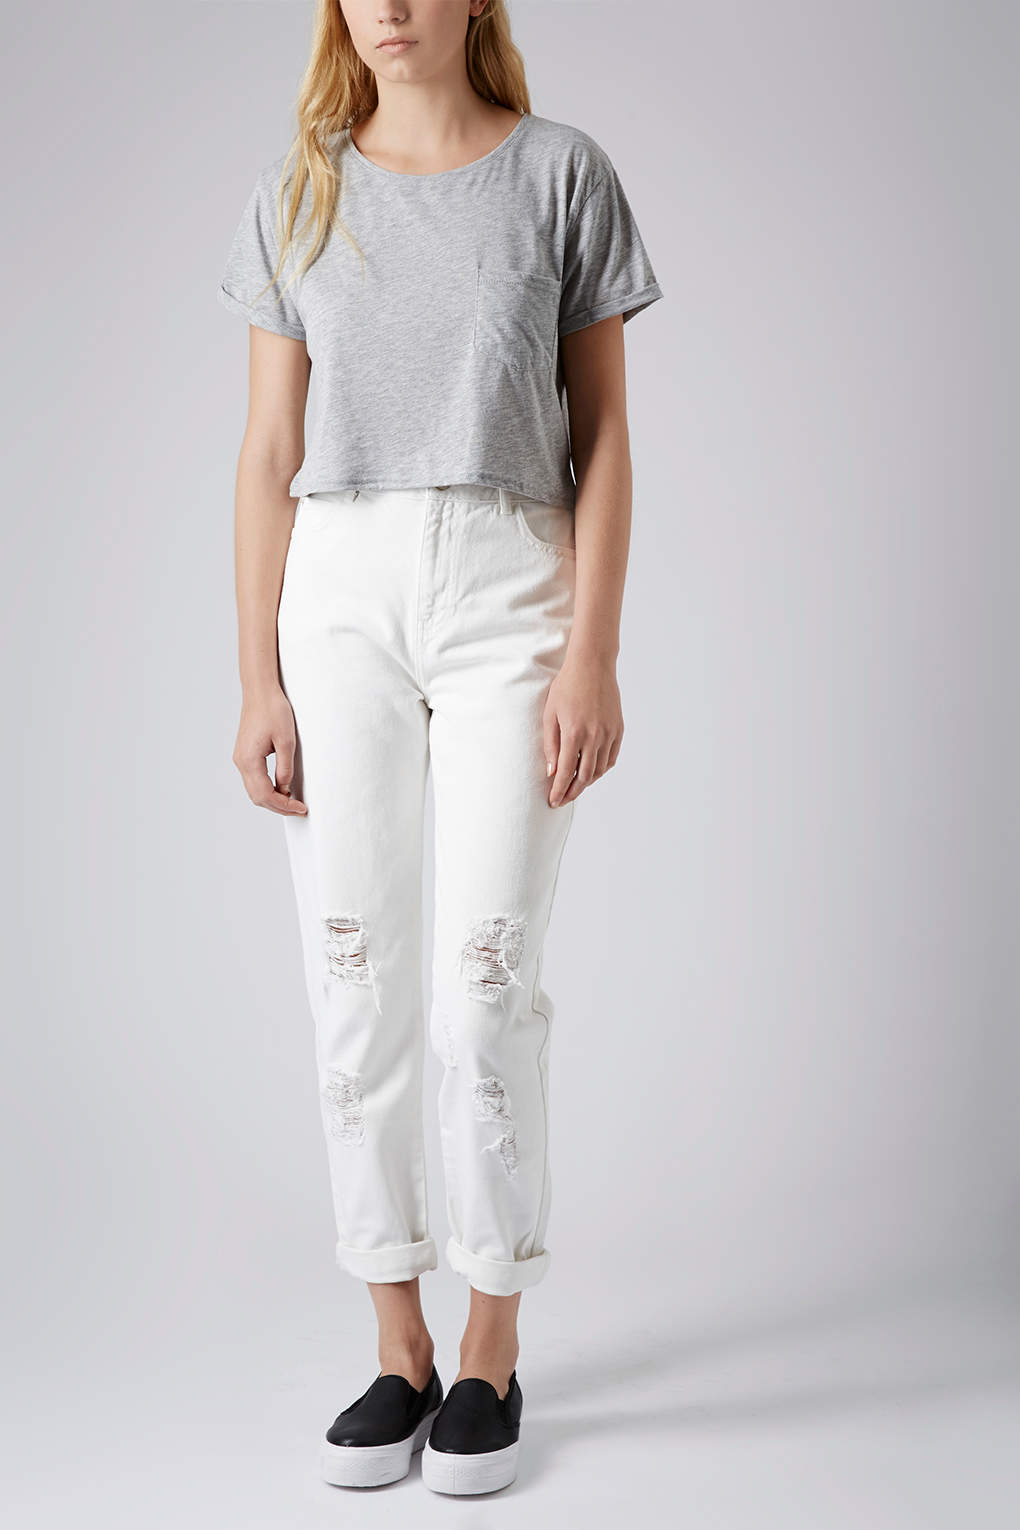 Lyst Moto White Ripped Mom Jeans in White